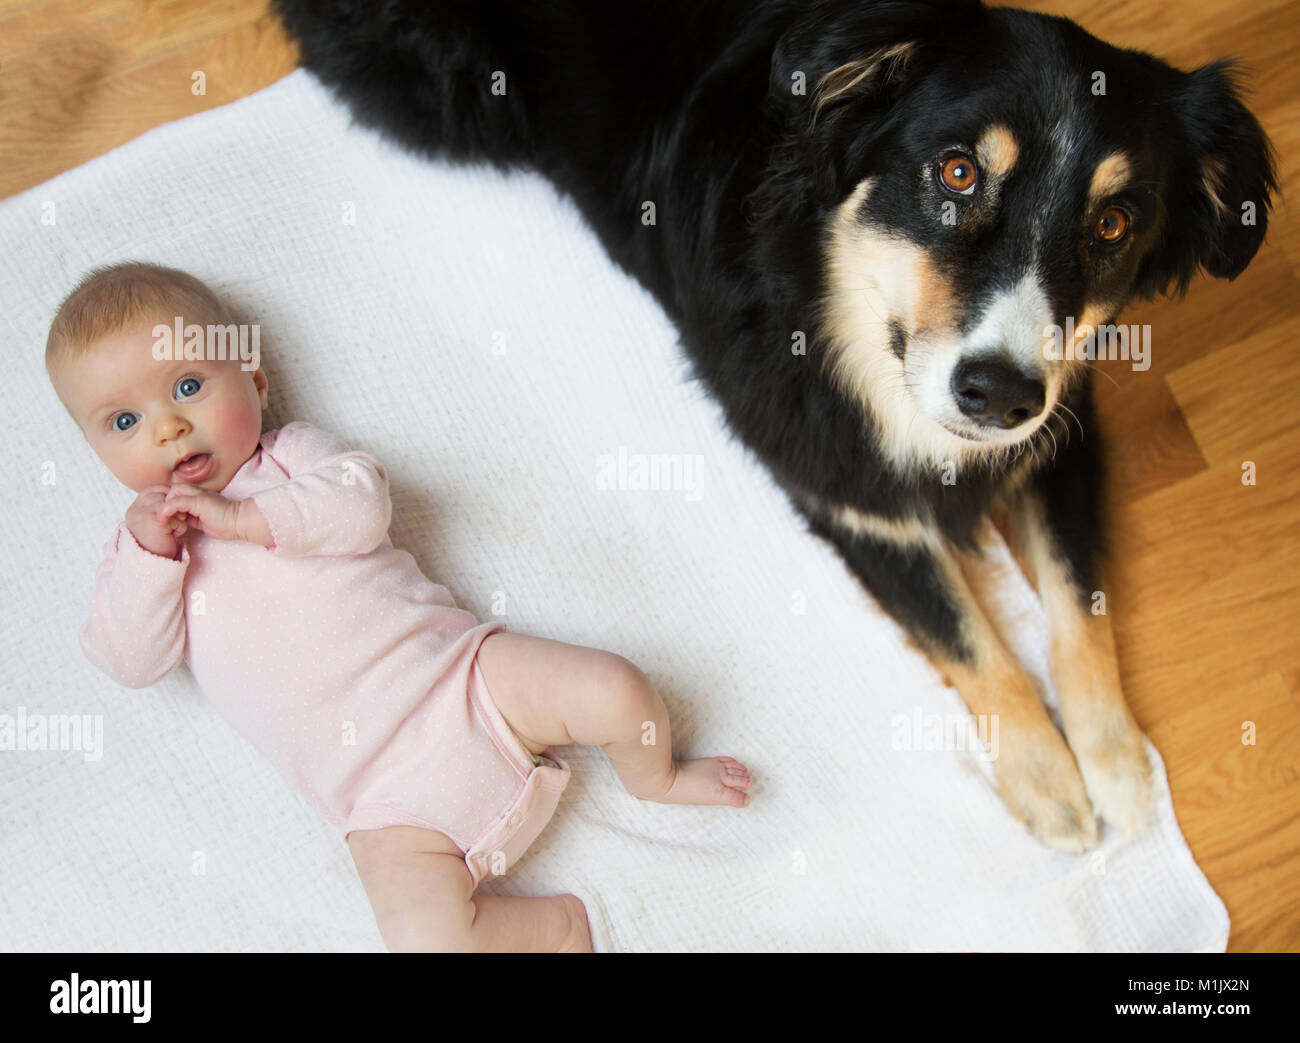 High Angle View of Baby and Dog Laying on Floor Stock Photo